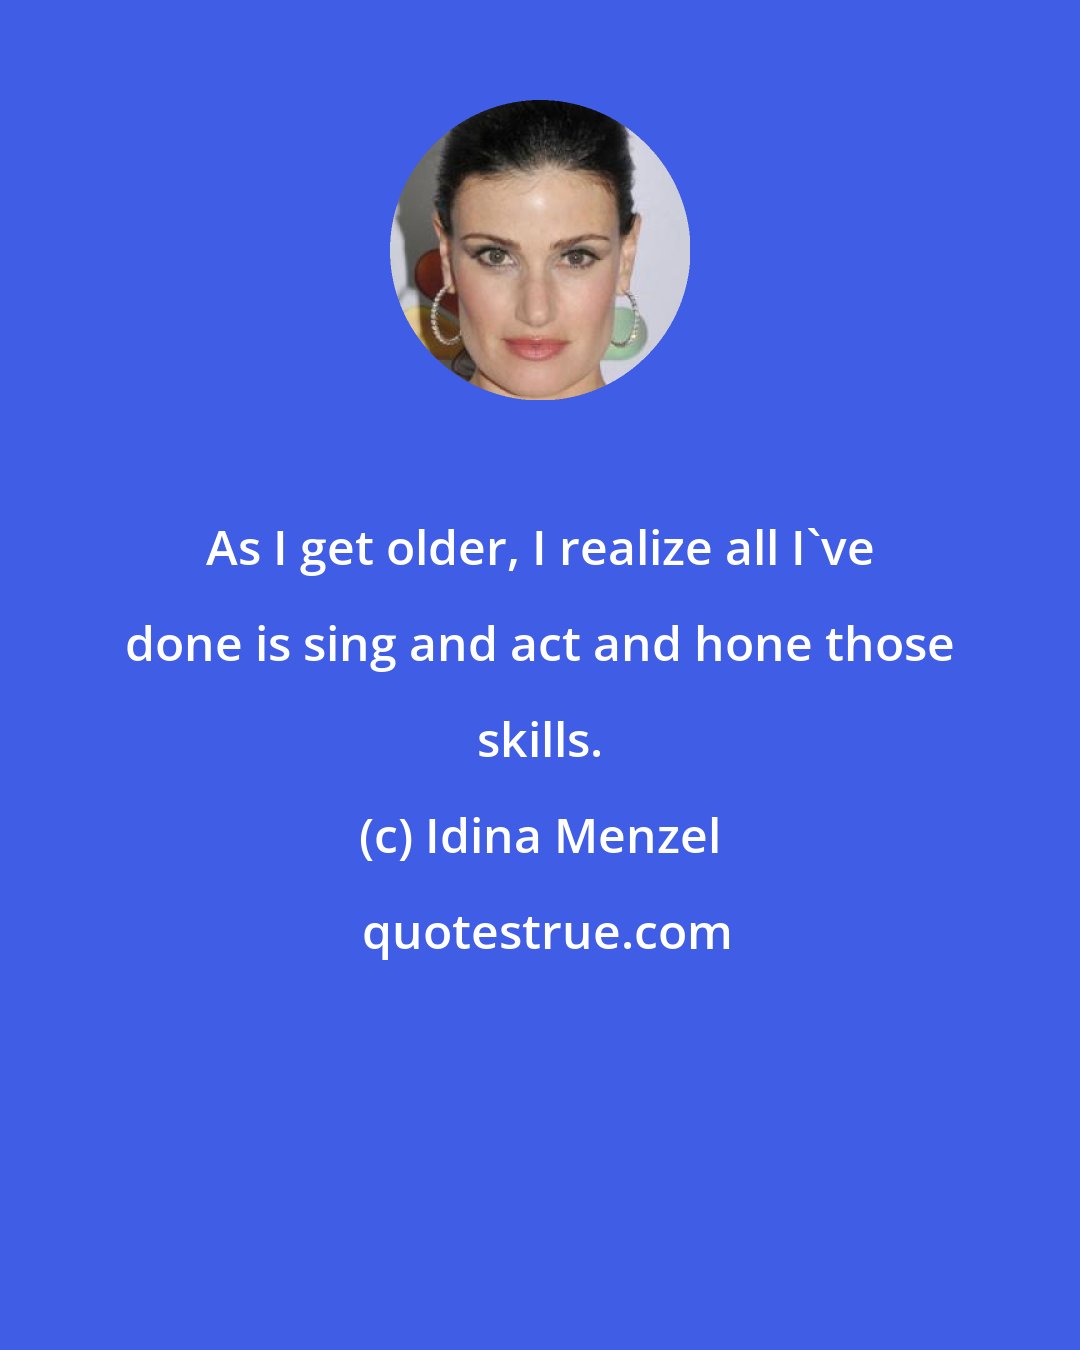 Idina Menzel: As I get older, I realize all I've done is sing and act and hone those skills.